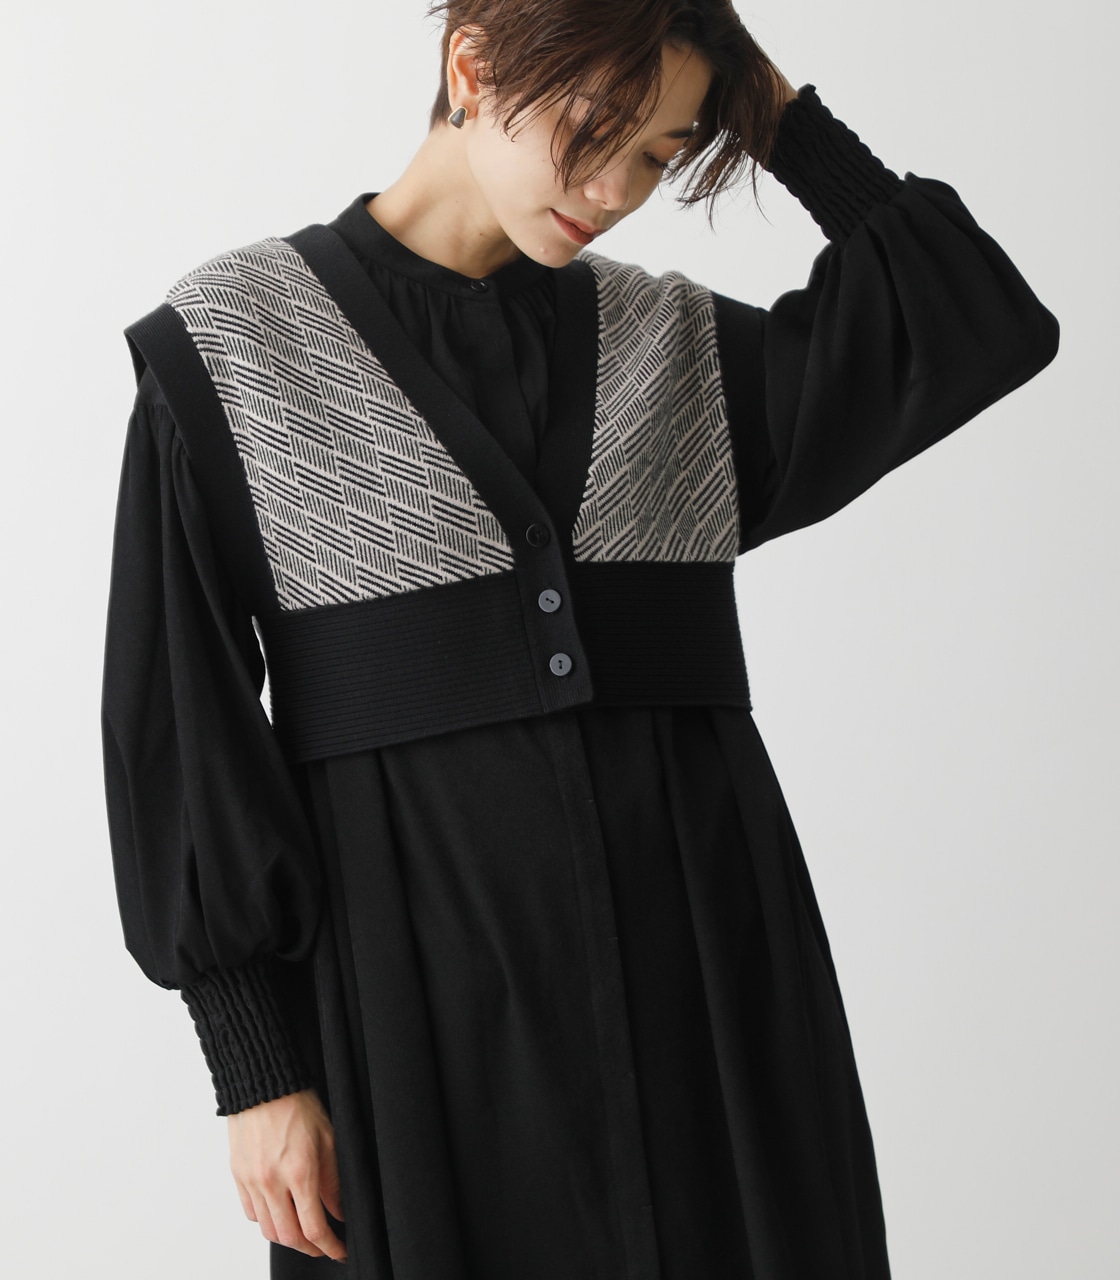 PATTERN COMPACT KNIT VEST/パターンコンパクトニットベスト 詳細画像 柄BLK 1